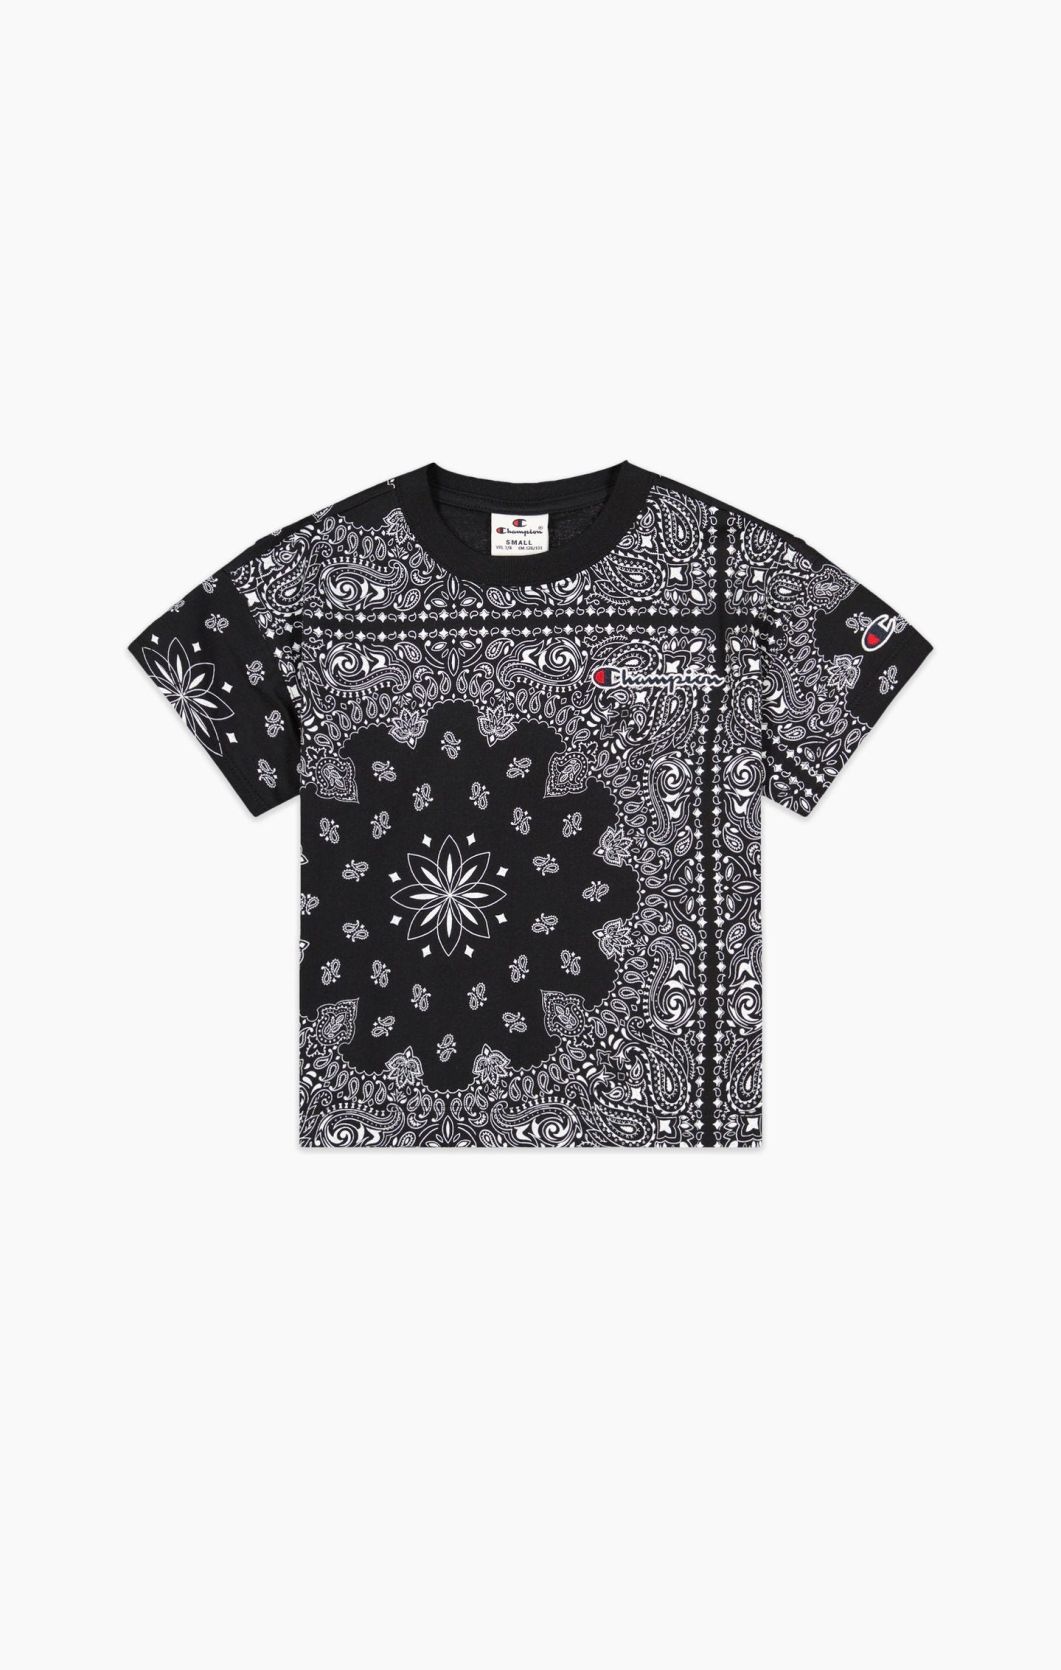 All-Over Paisley Print Cropped T-Shirt | Champion Nederland